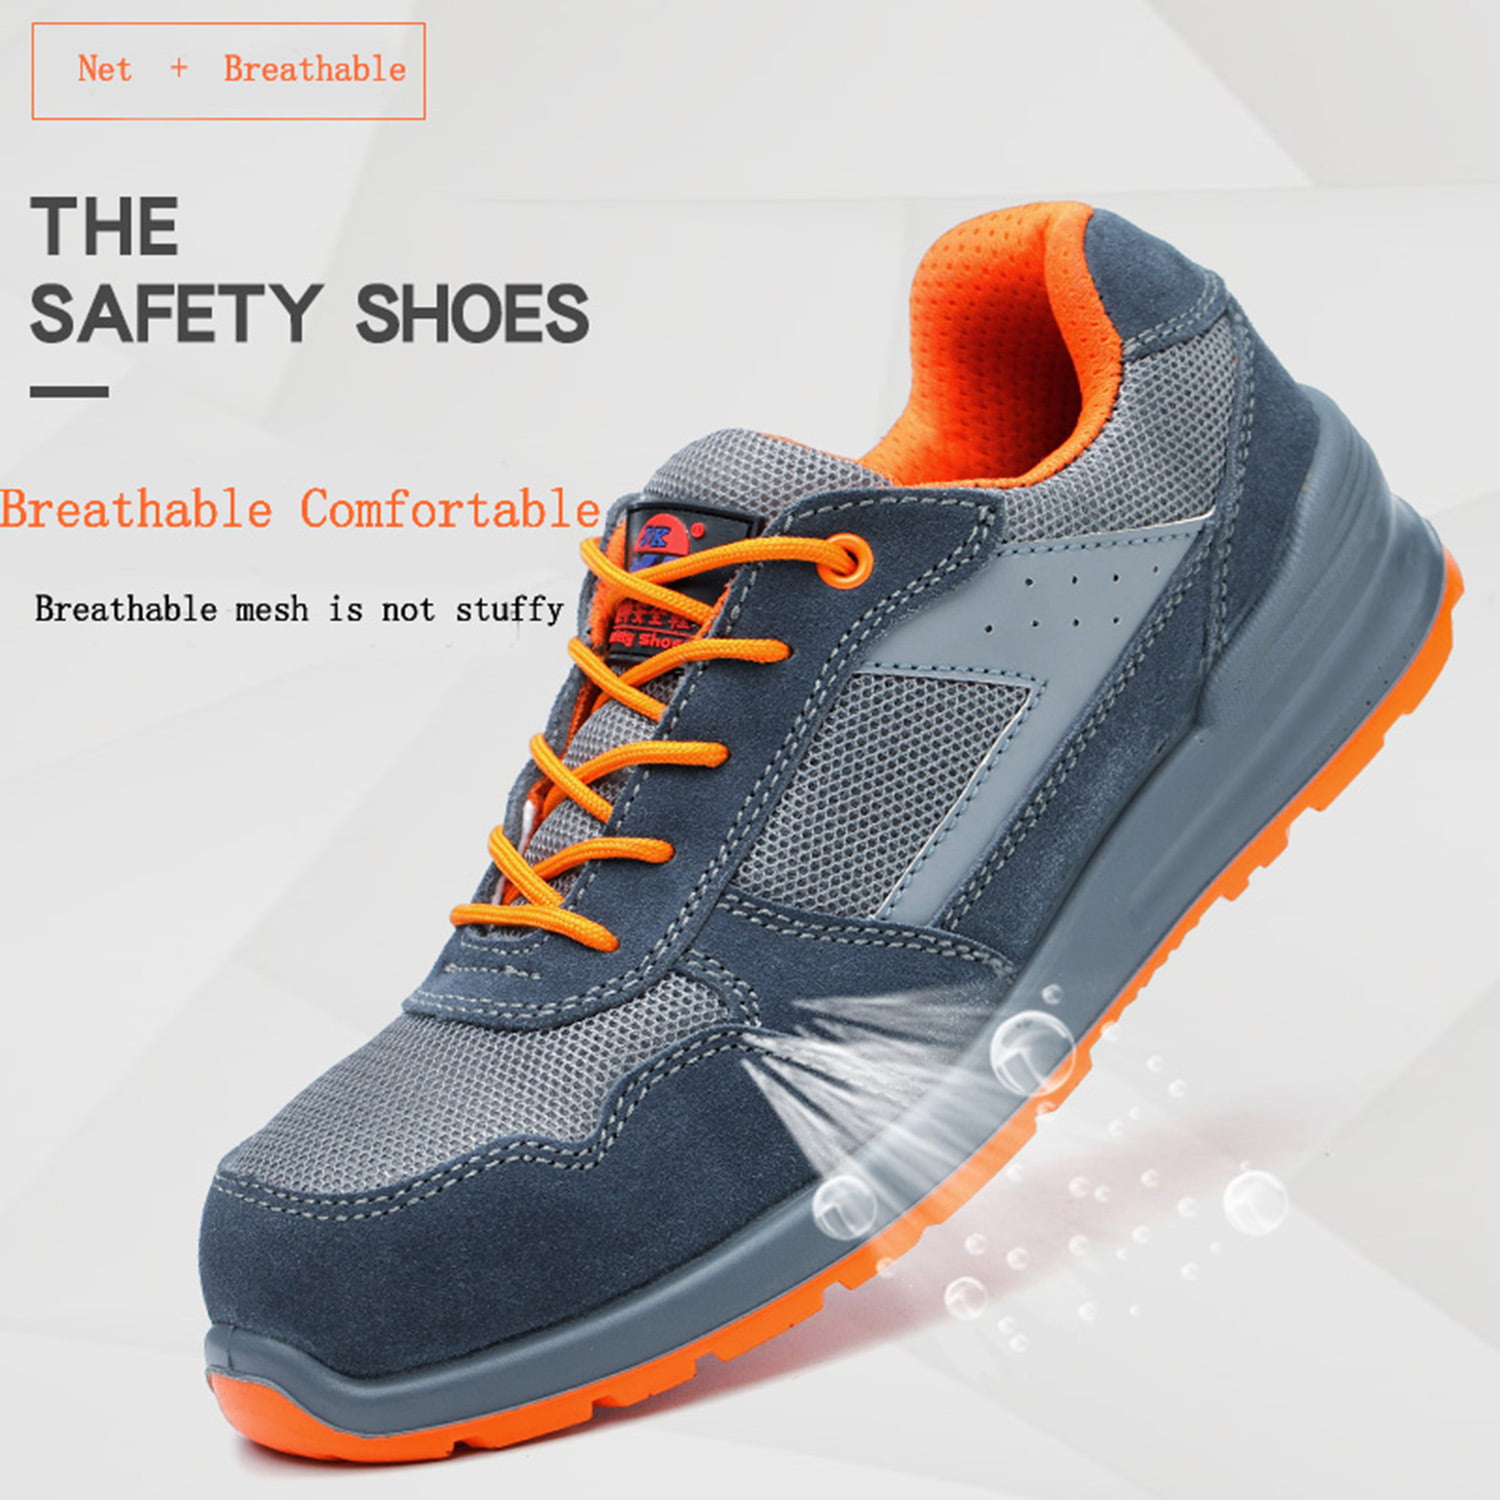 SUADEX Steel Toe Sneaker for Men Women Comfortable Breathable Stee Toe Shoes for Work Safety Composite Toe Shoes